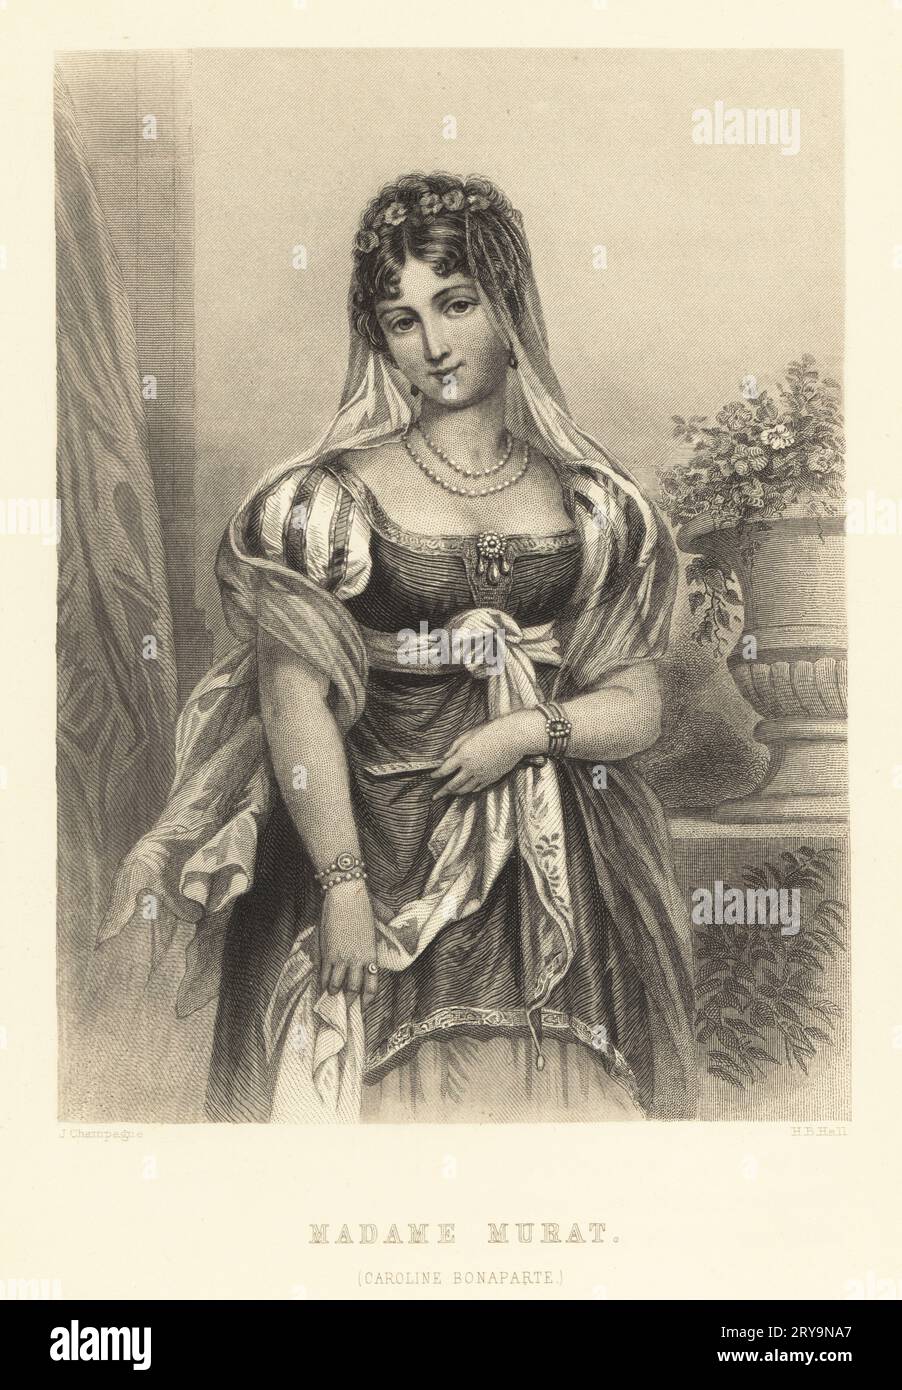 Carolina Maria Annunziata Bonaparte Murat Macdonald, 1782-1839. Caroline Bonaparte, Imperial French princess, younger sister of Emperor Napoleon I of France. In 1800, Caroline married Joachim Murat, Marshal of the Empire, Prince Murat and later King of Naples. Steel engraving by H.B. Hall after a portrait by Jules Champagne from Frank B. Goodrich’s The Court of Napoleon or Society under the First Empire, J. B. Lippincott, Philadelphia, 1875. Stock Photo